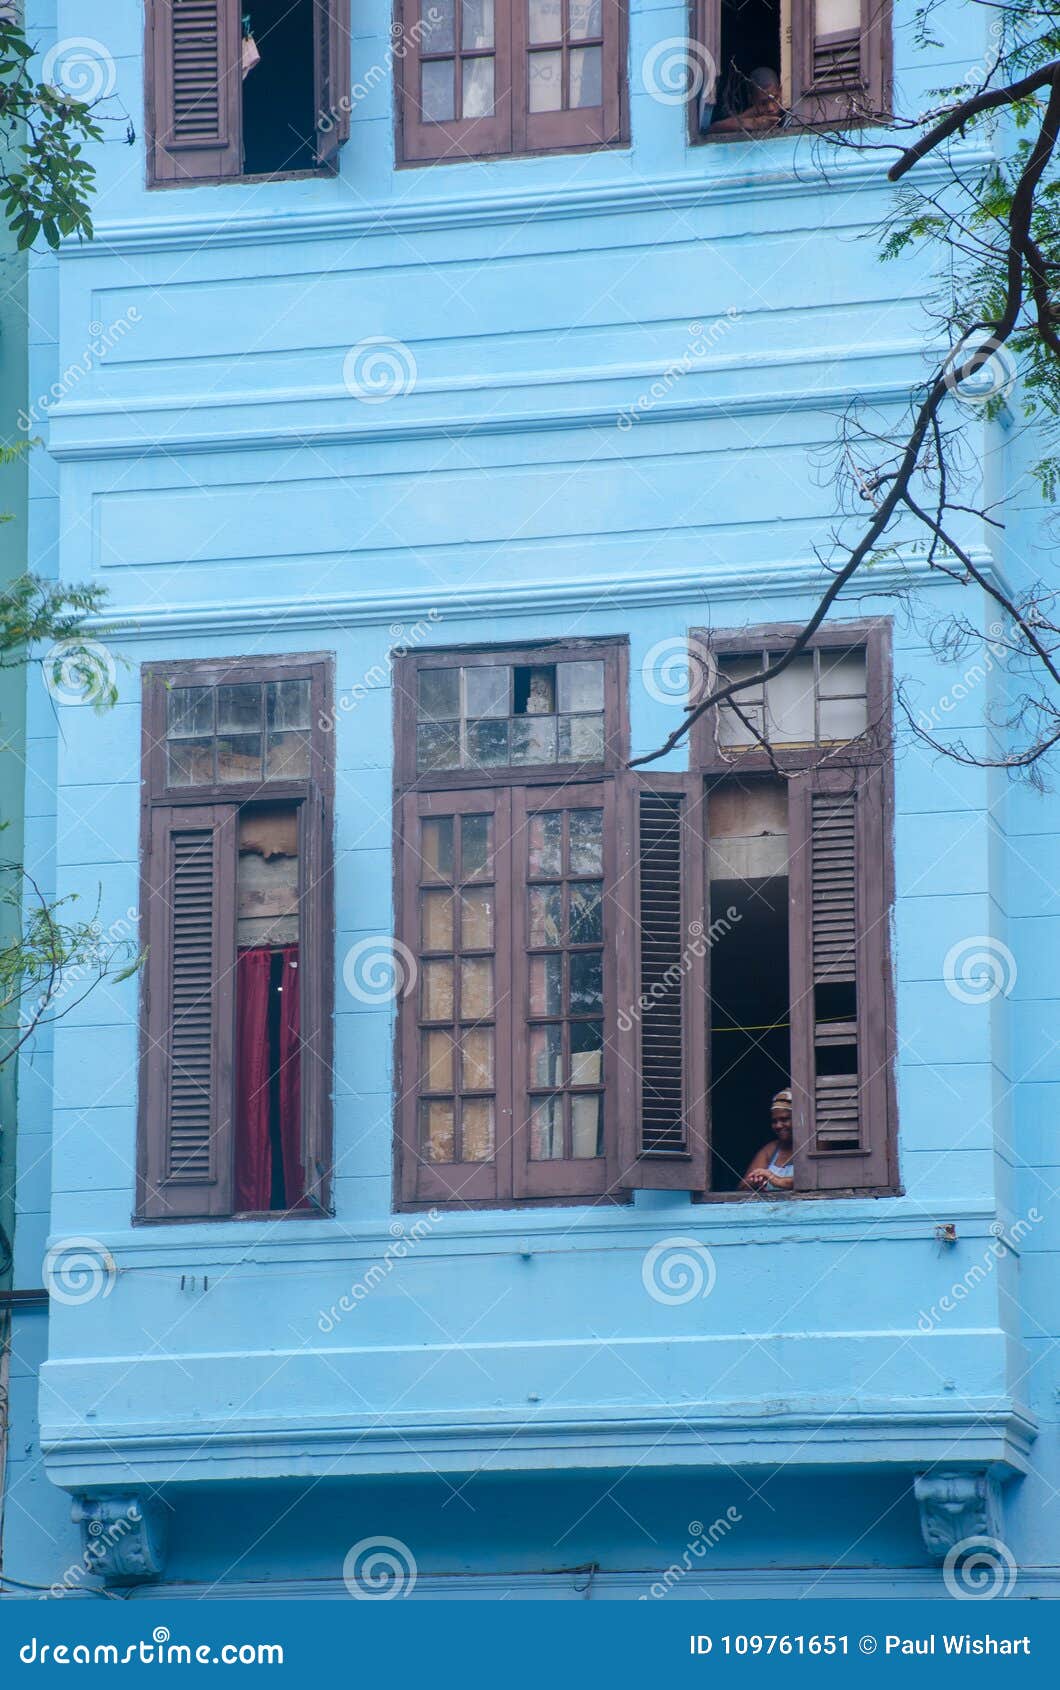 Old Havanna Detail of Blue Spanish Style Building Editorial Photo - Image of 109761651